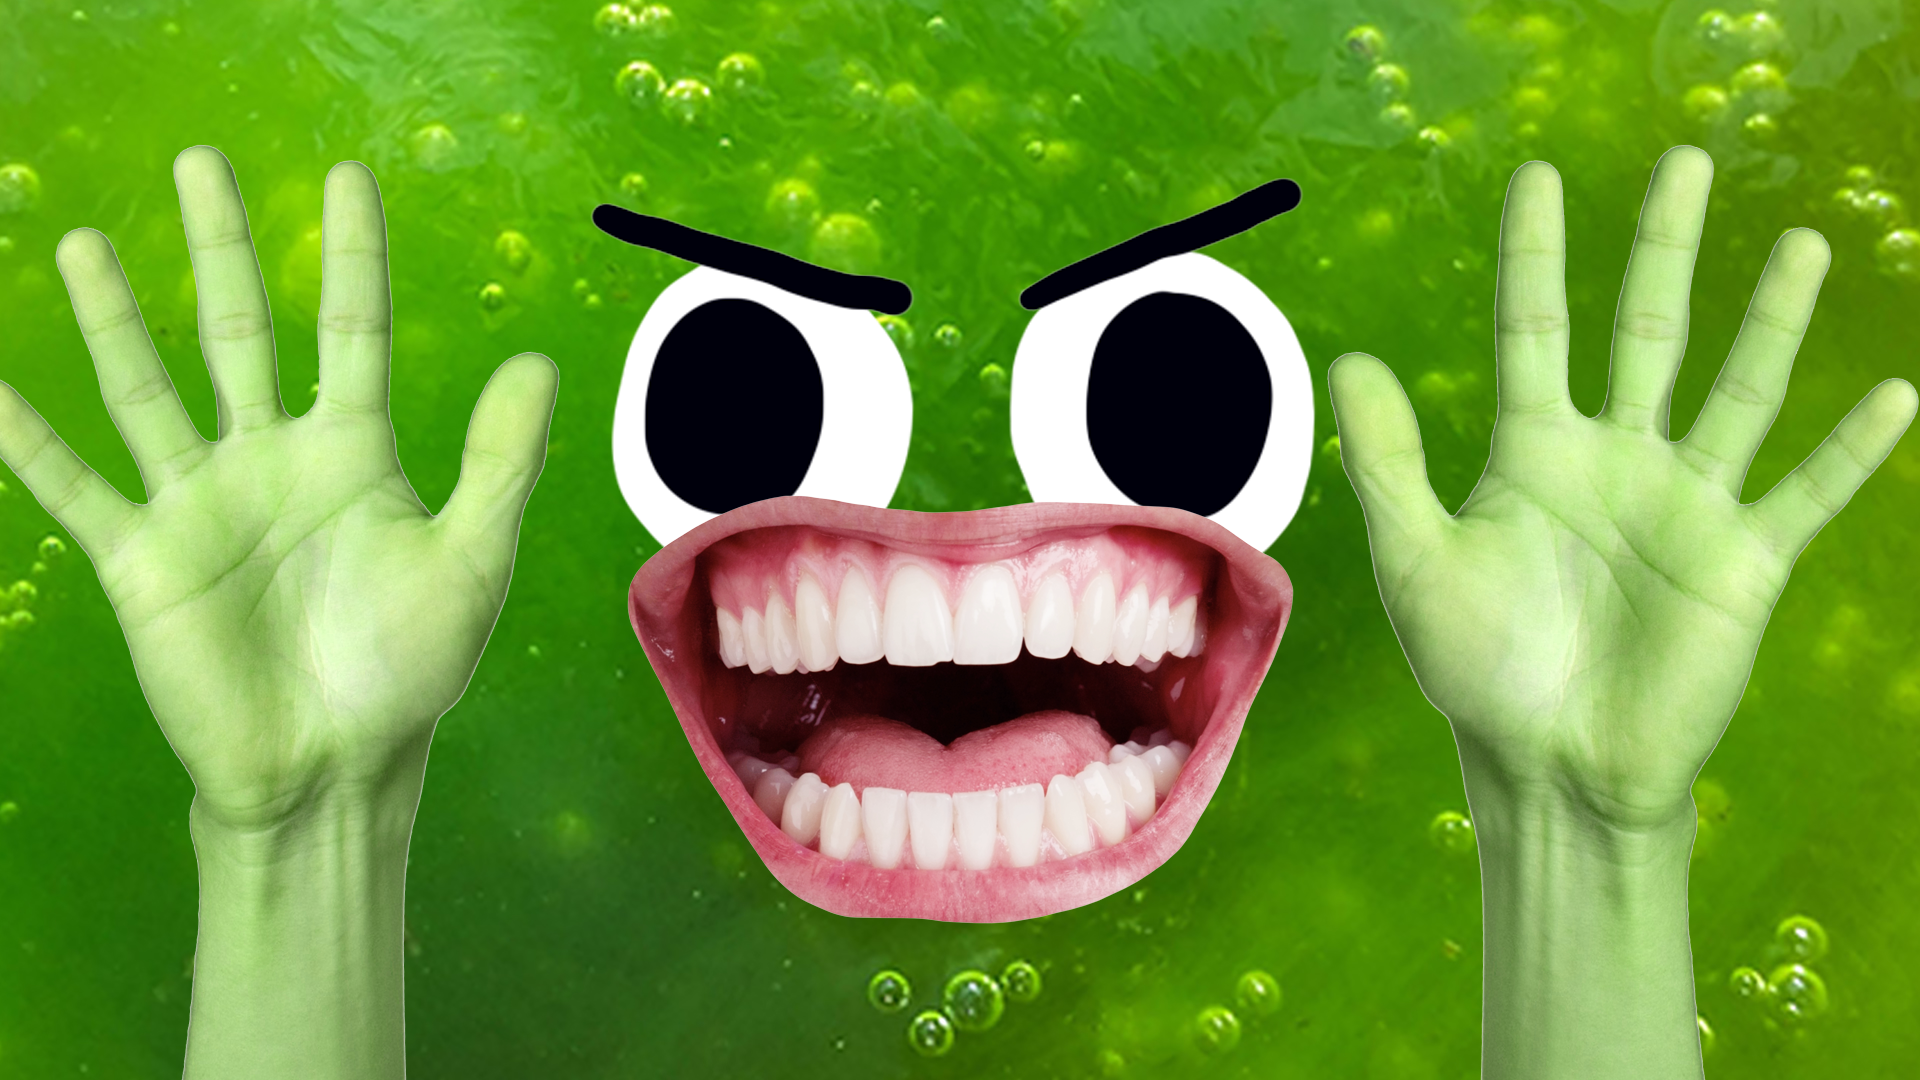 A green slime character